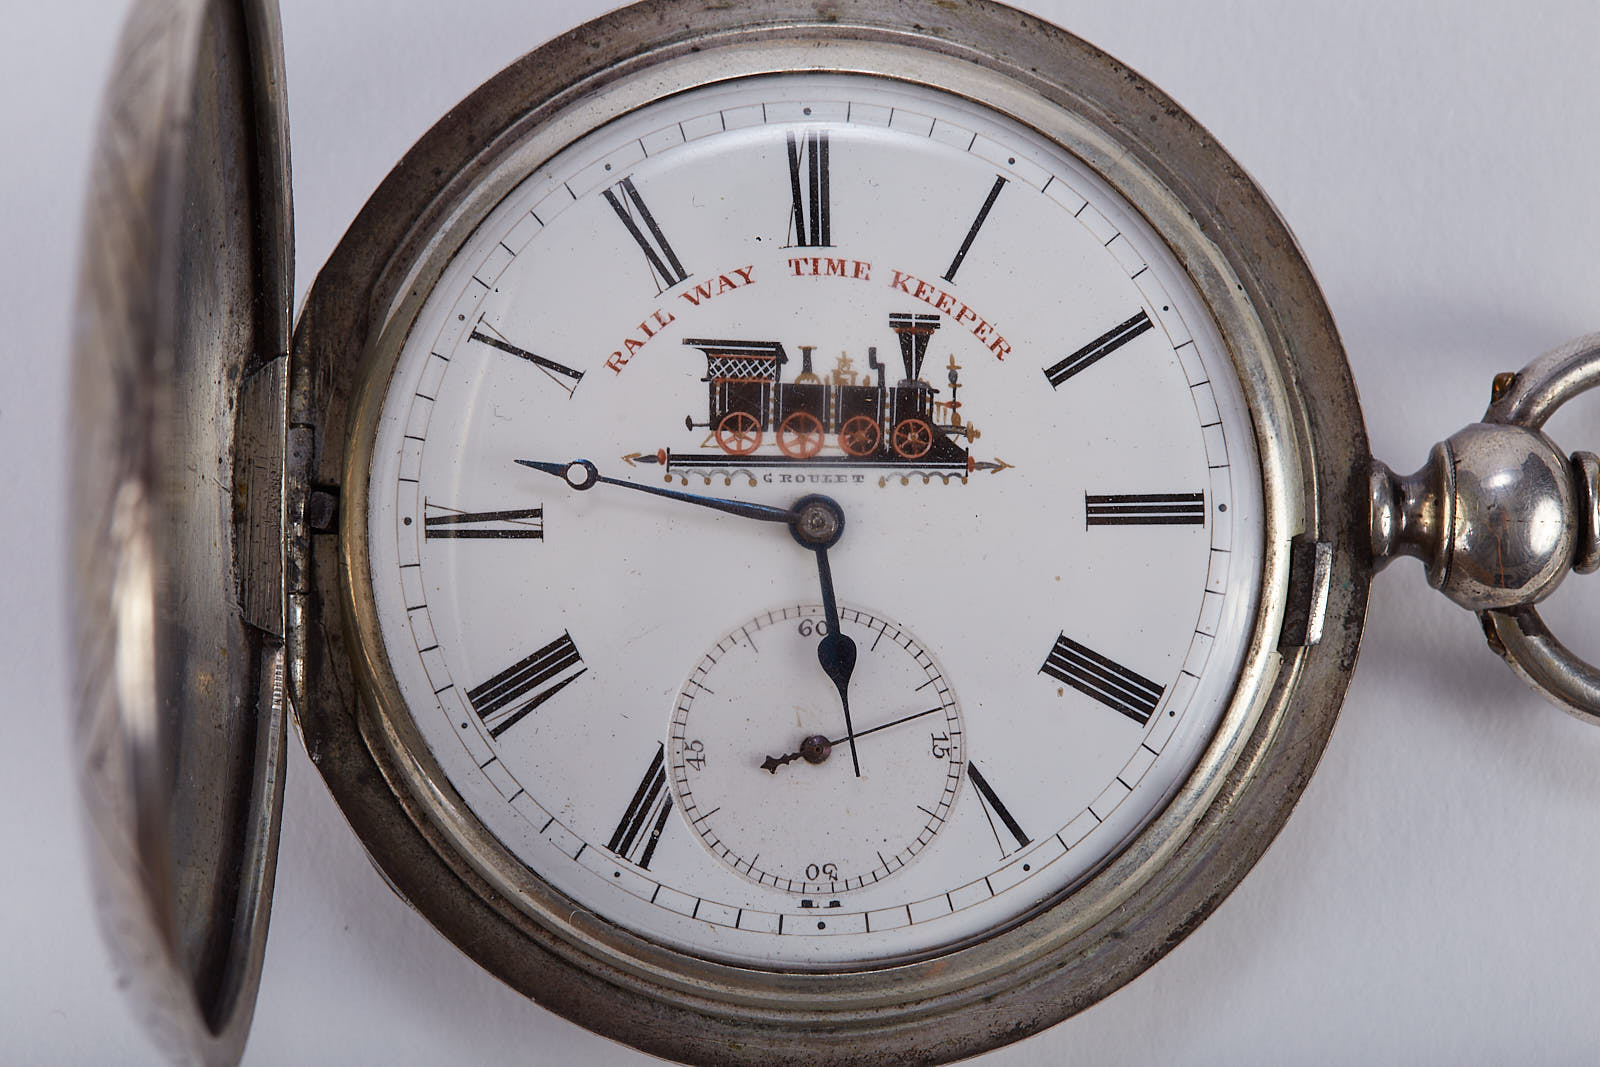 Lot 191: Large "Railway Time Keeper Pocket Watch Locle Suisse"